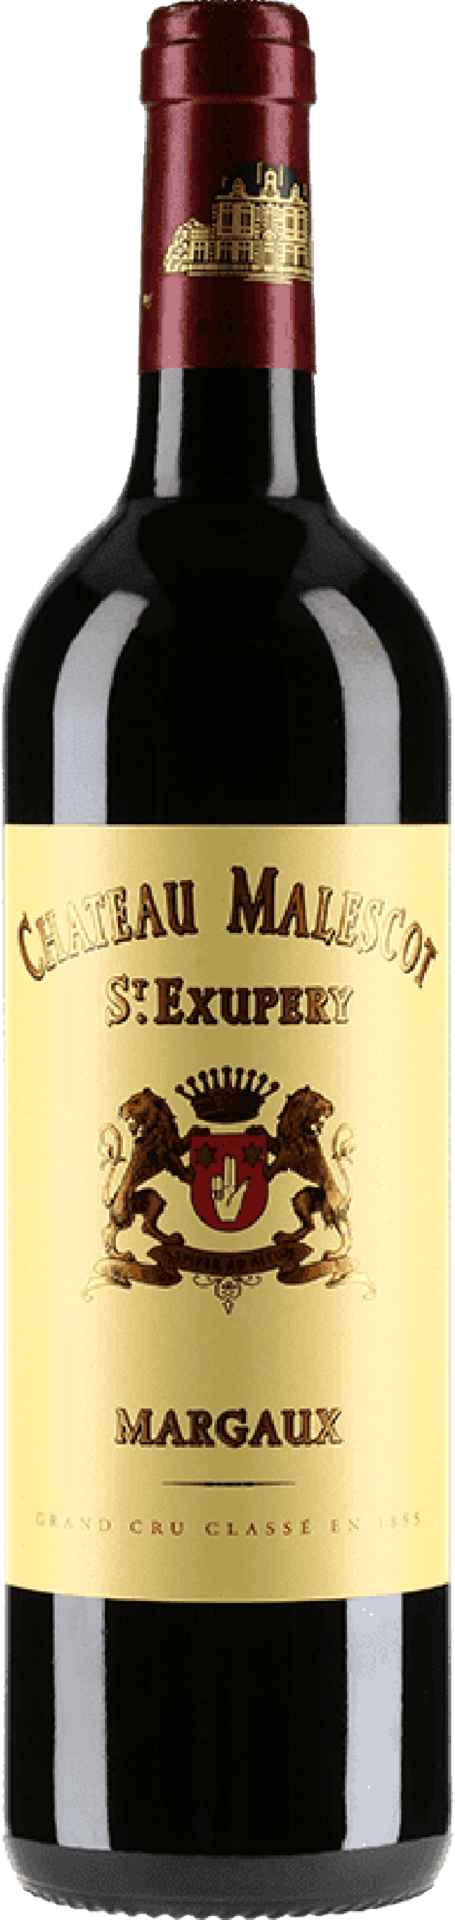 Château Malesot St. Exupery in 6er HK 